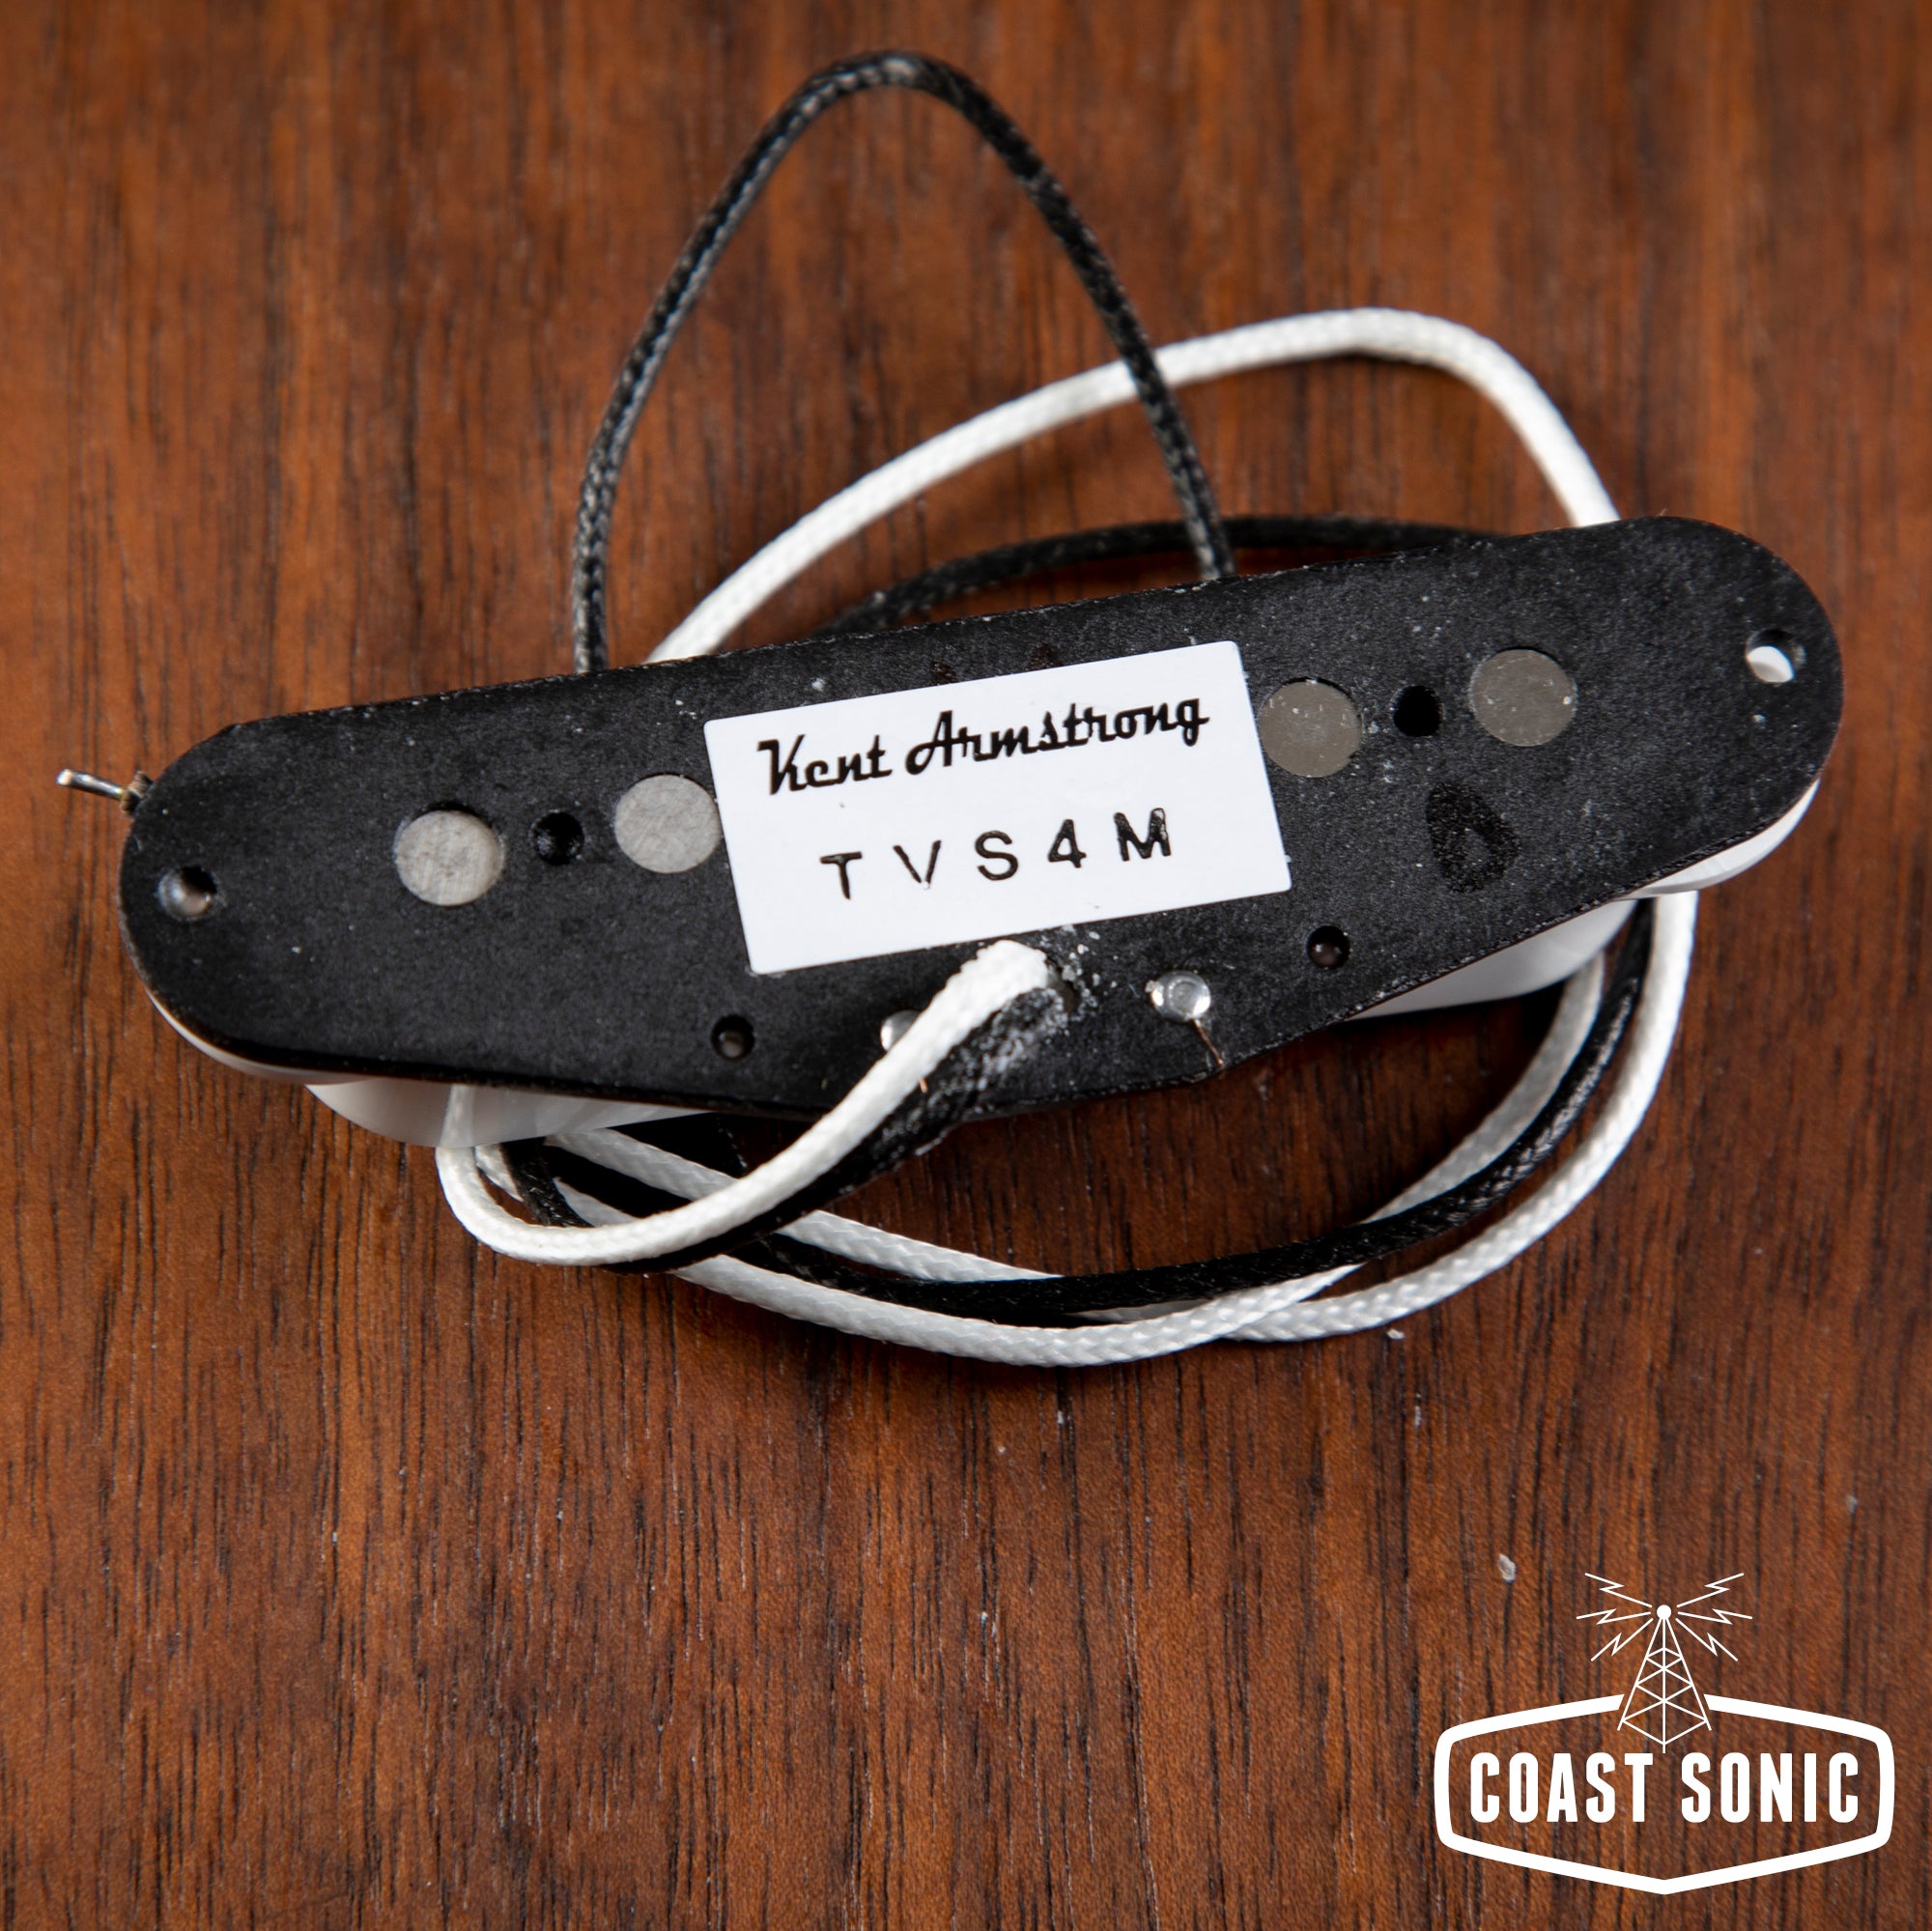 Kent Armstrong TVS4M Vintage Series Texas Vintage Stratocaster Middle Pickup *White*